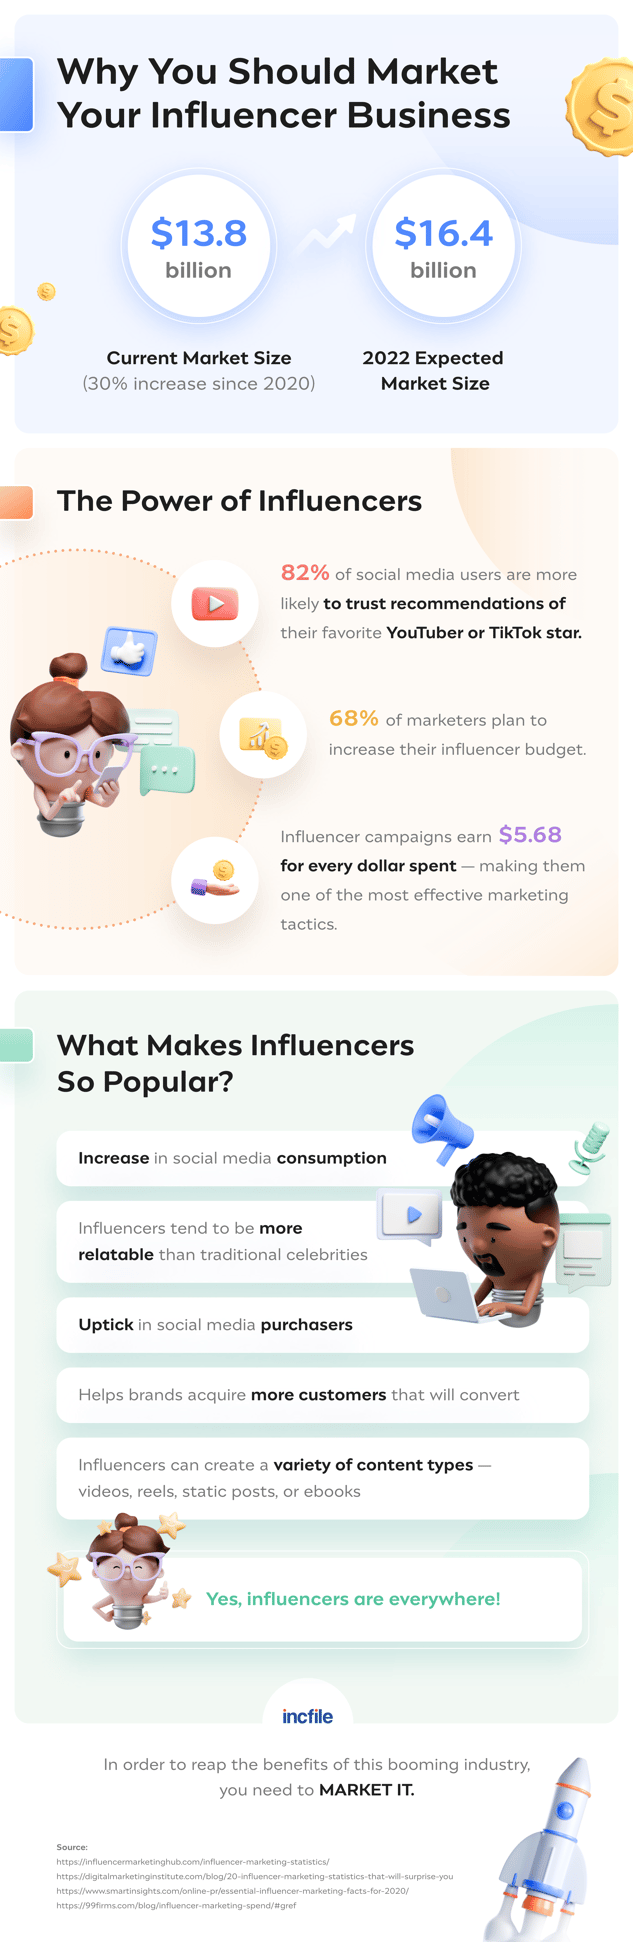 why market your influencer business